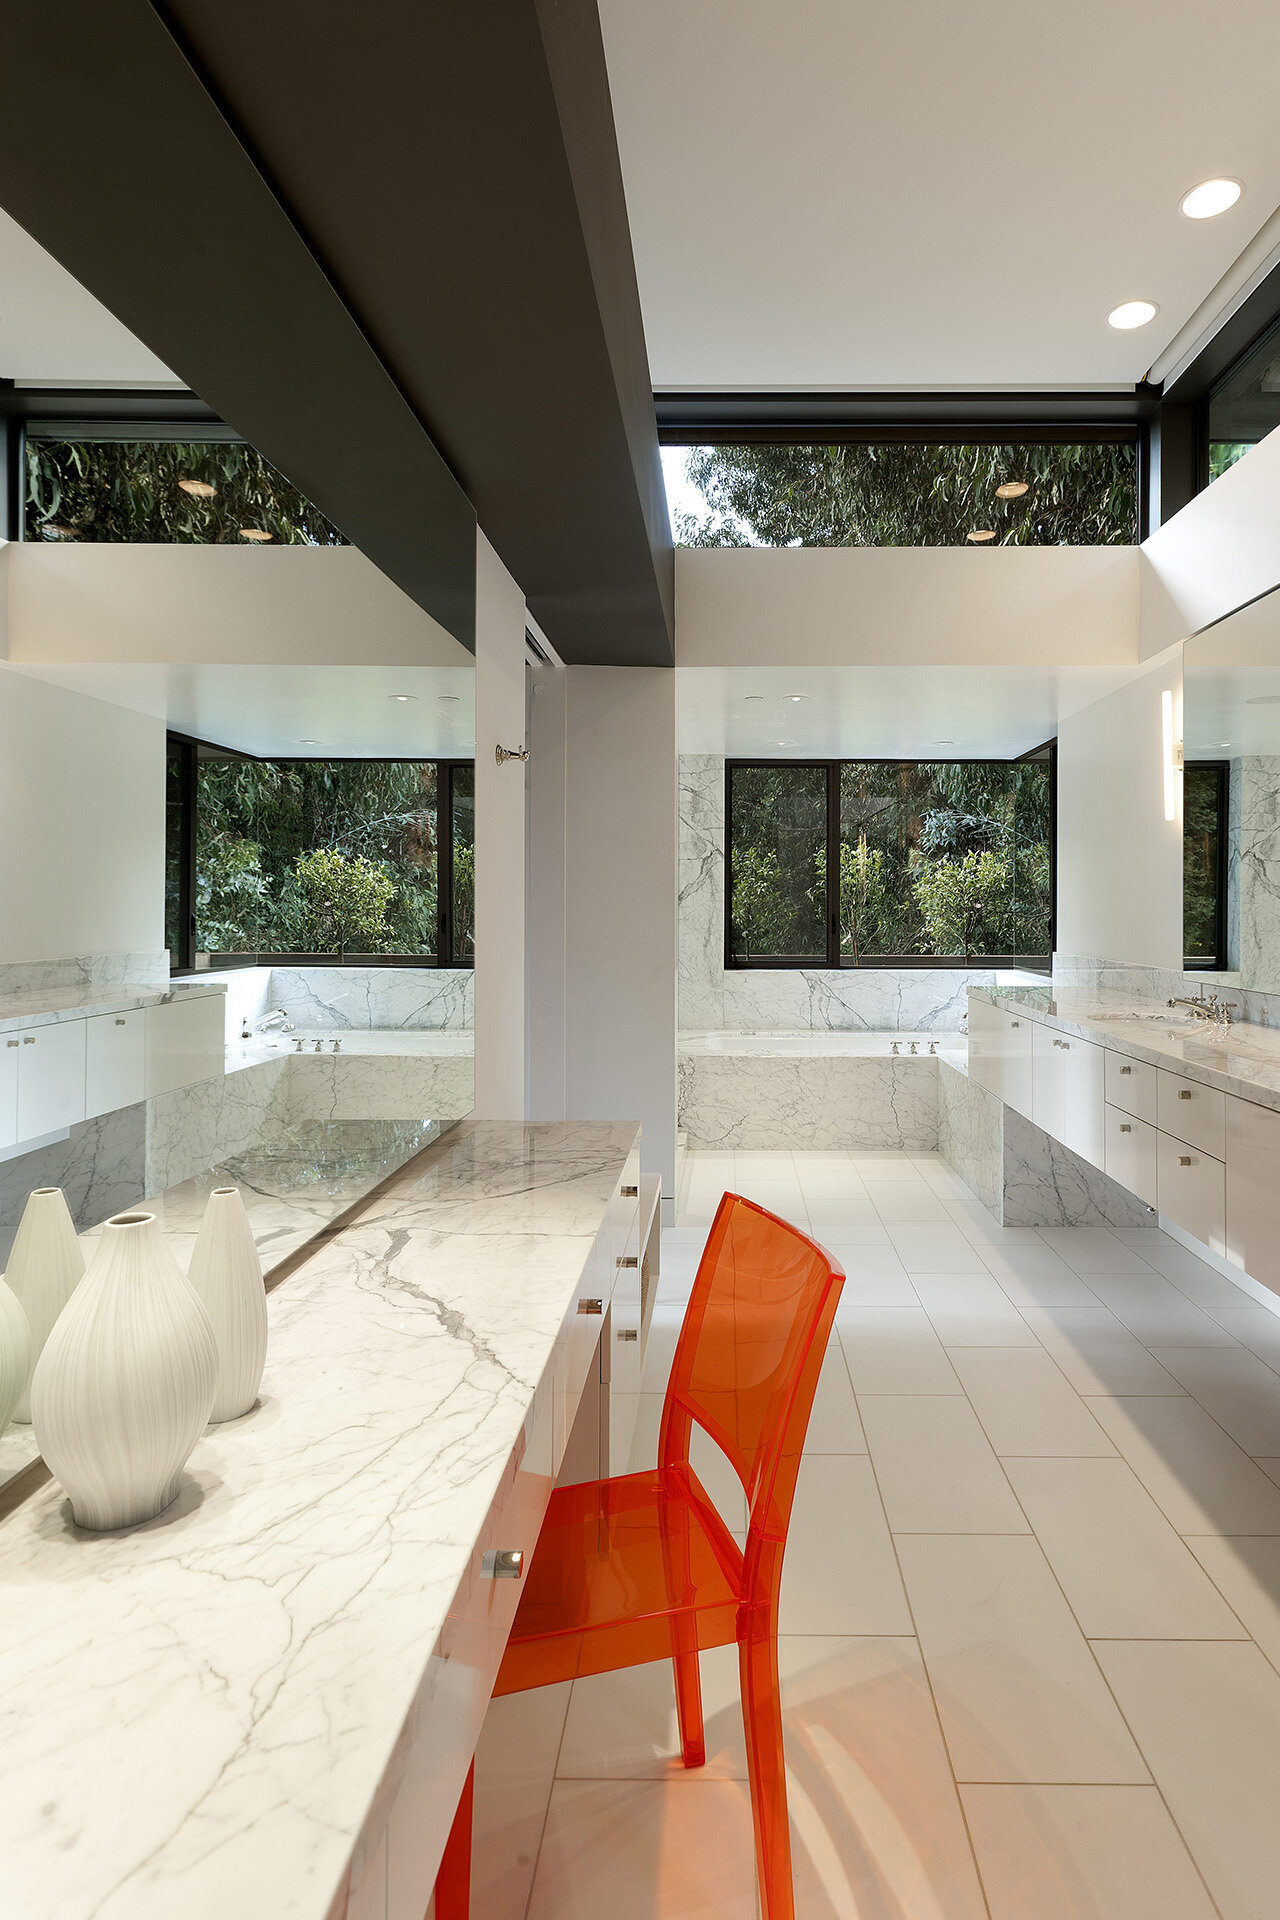  Top best luxury general contracting company modern home in a canyon neighborhood of Los Angeles featuring iconic design by architect Chu and Gooding featuring mid century style master bathroom suite with marble counters and clerestory windows.  